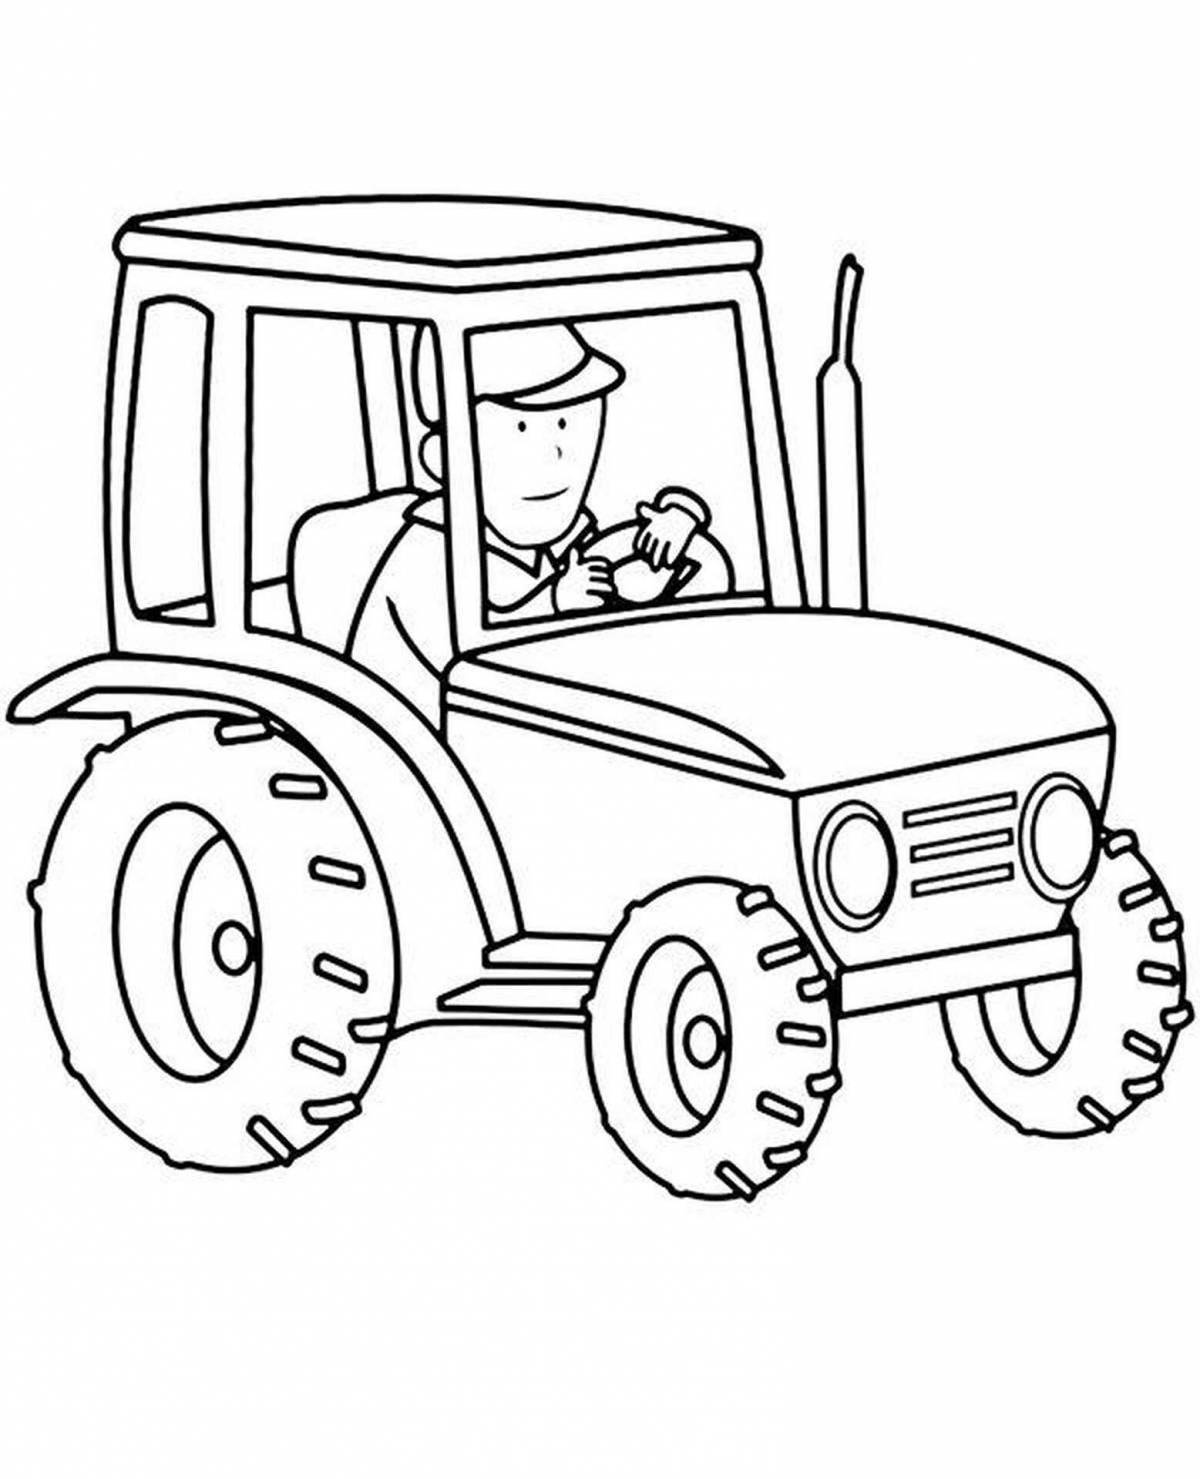 Dirty blue tractor coloring page